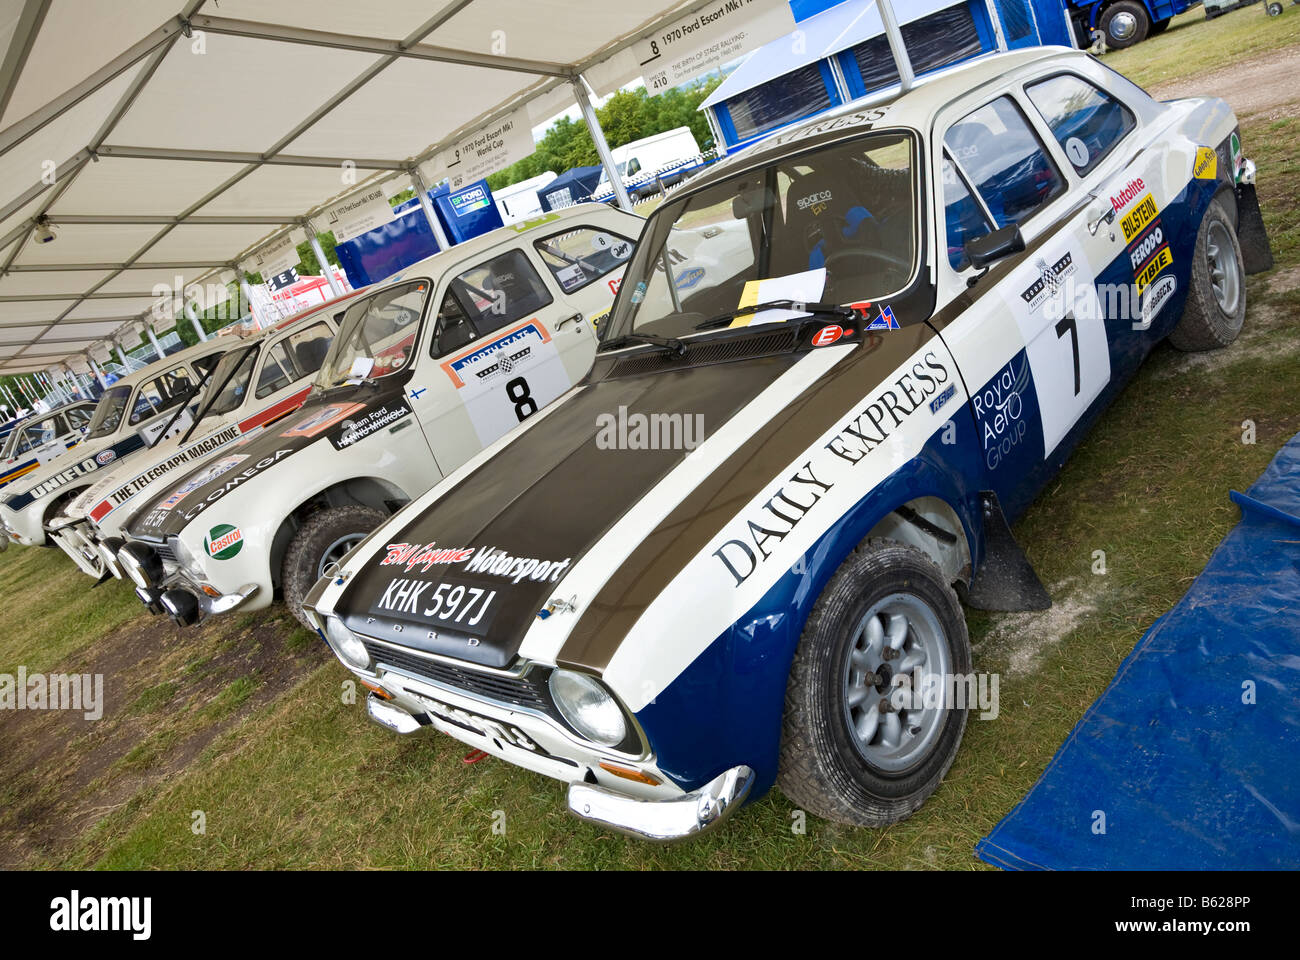 1970 Ford Escort Mk1 RS1600 in the paddock at Goodwood Festival of Speed, Sussex, UK. Stock Photo